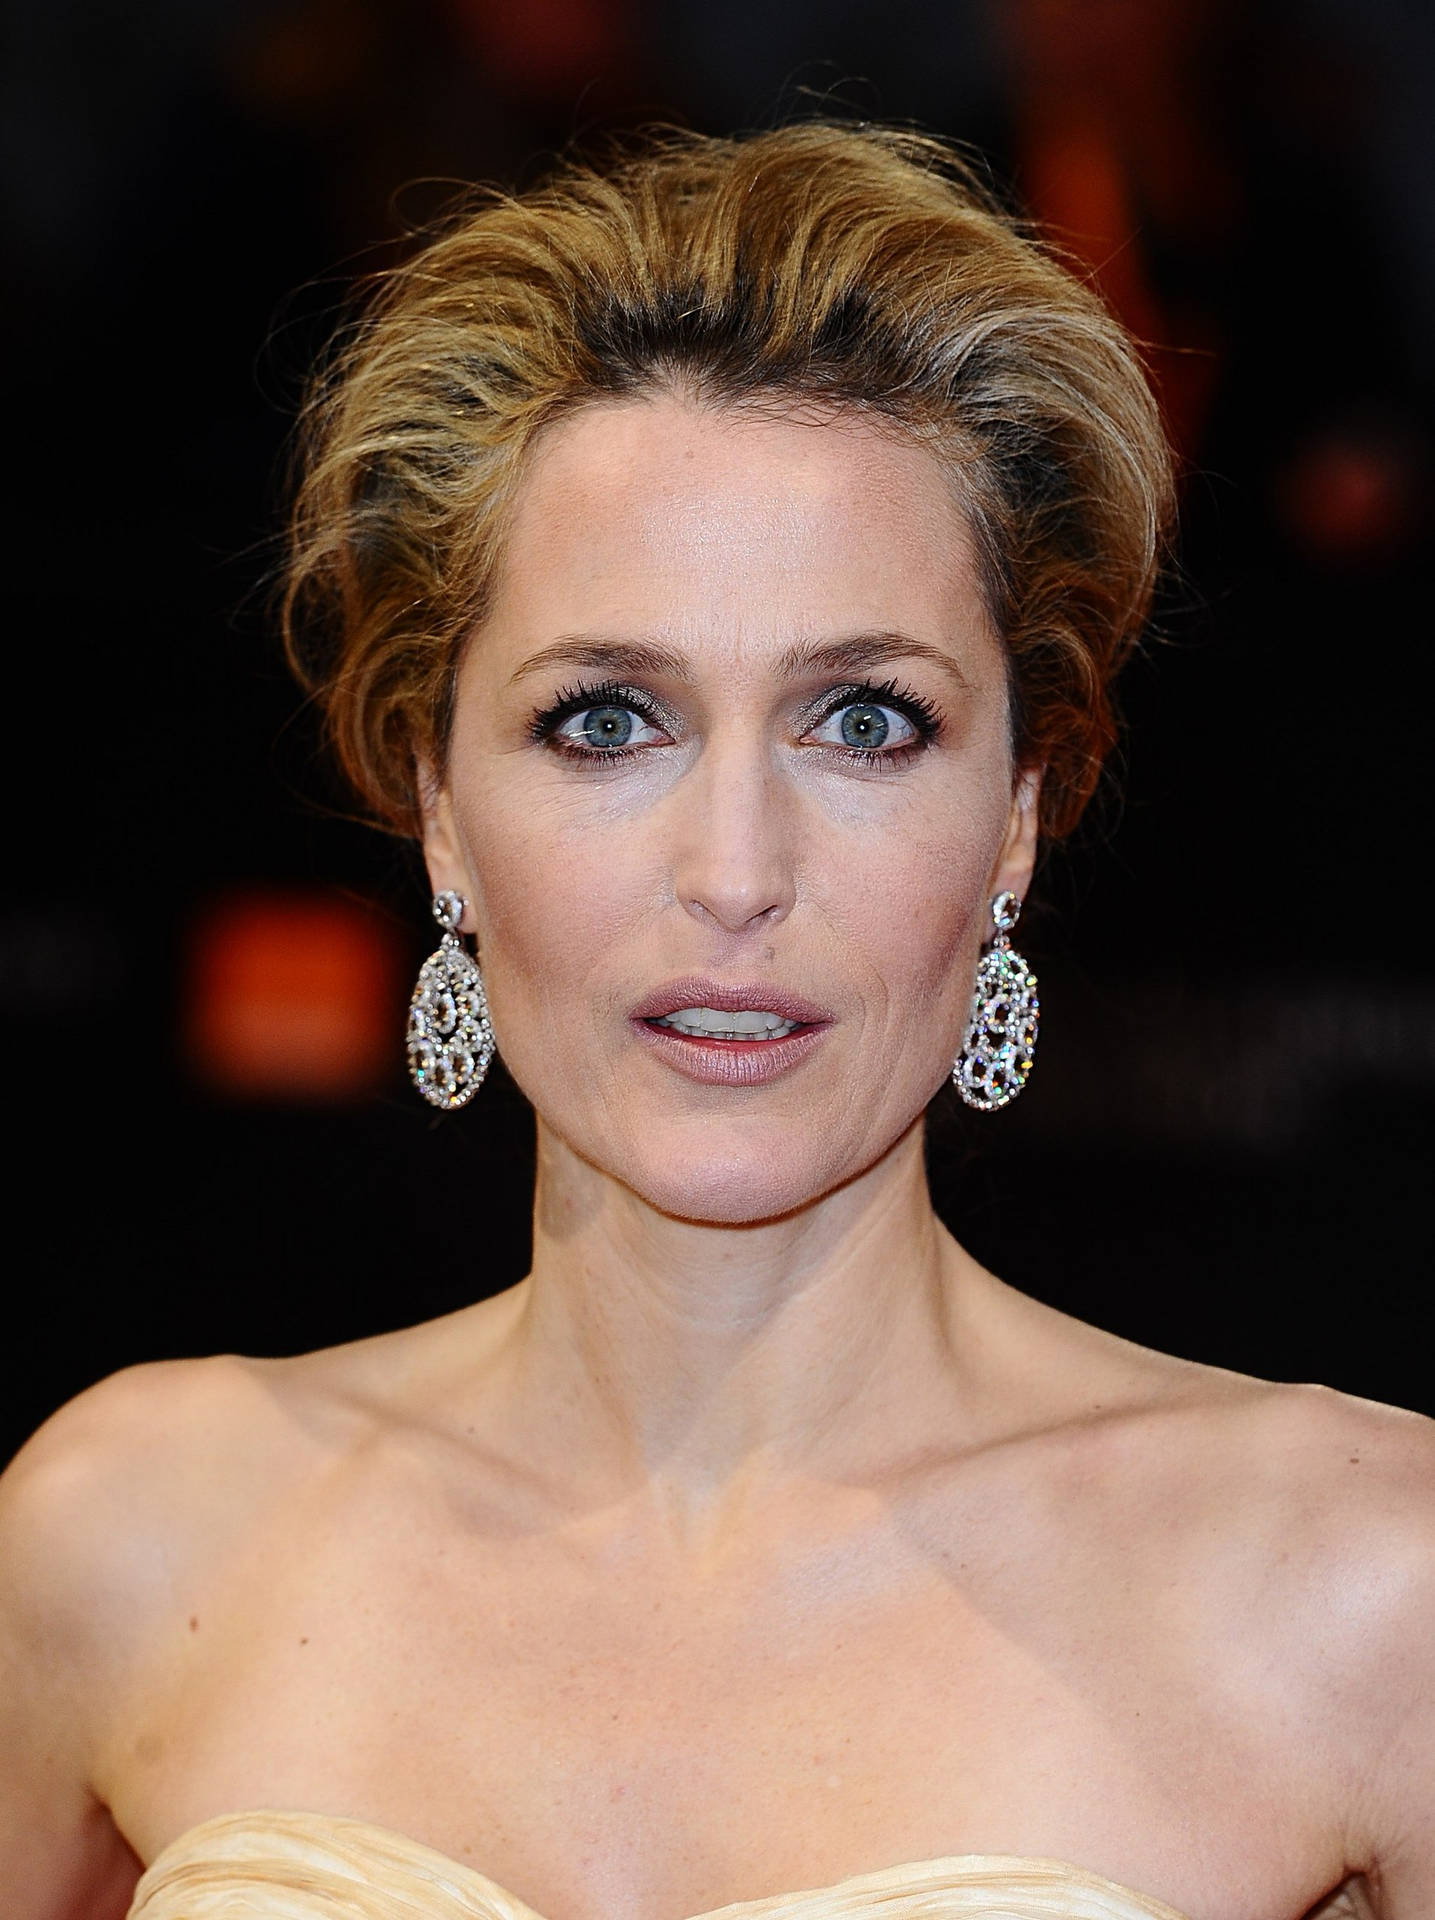 Gillian Anderson Hollywood Entertainer Background